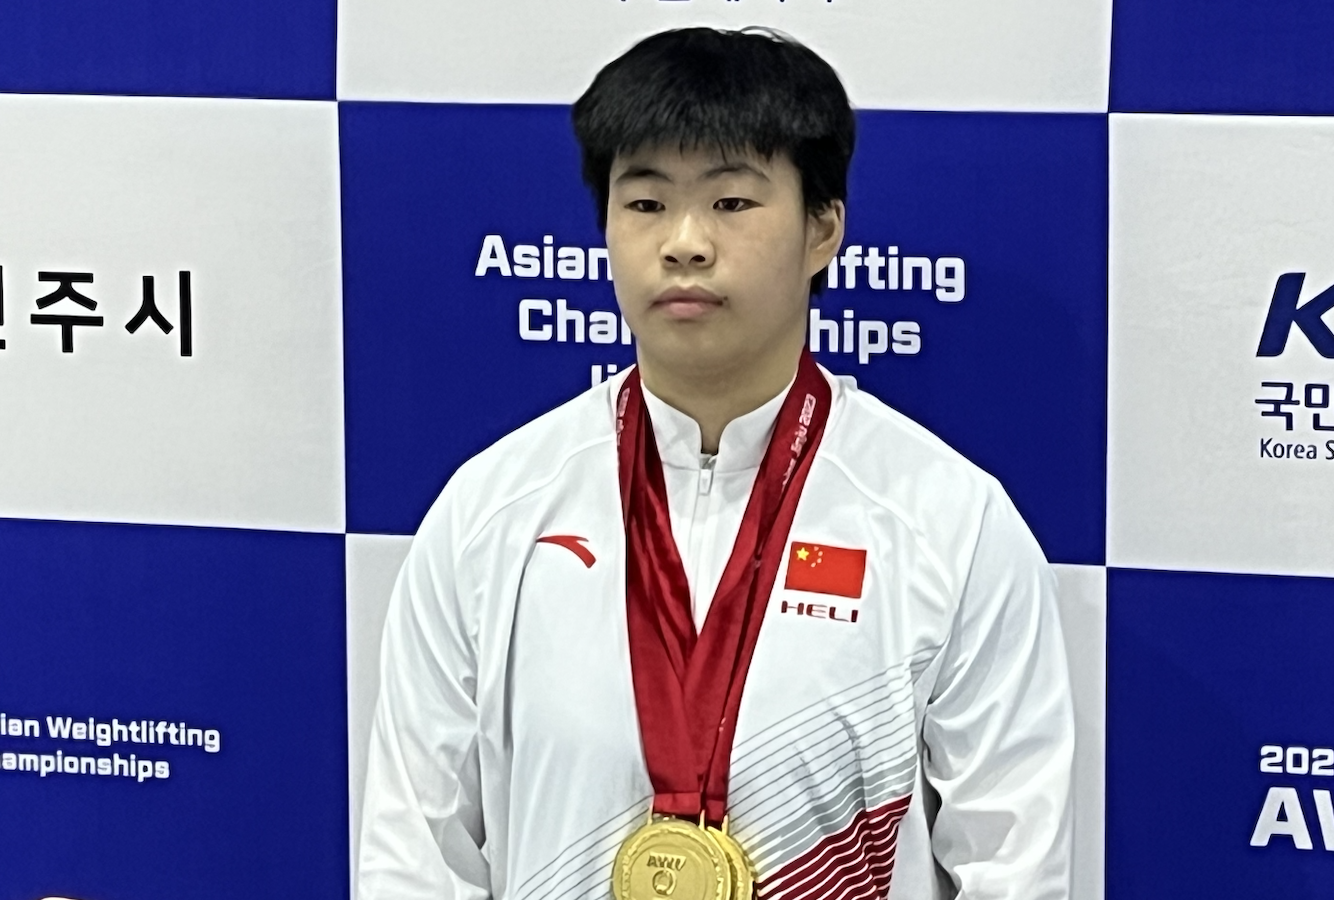 China’s Liao takes two world records at Asian Weightlifting Championships